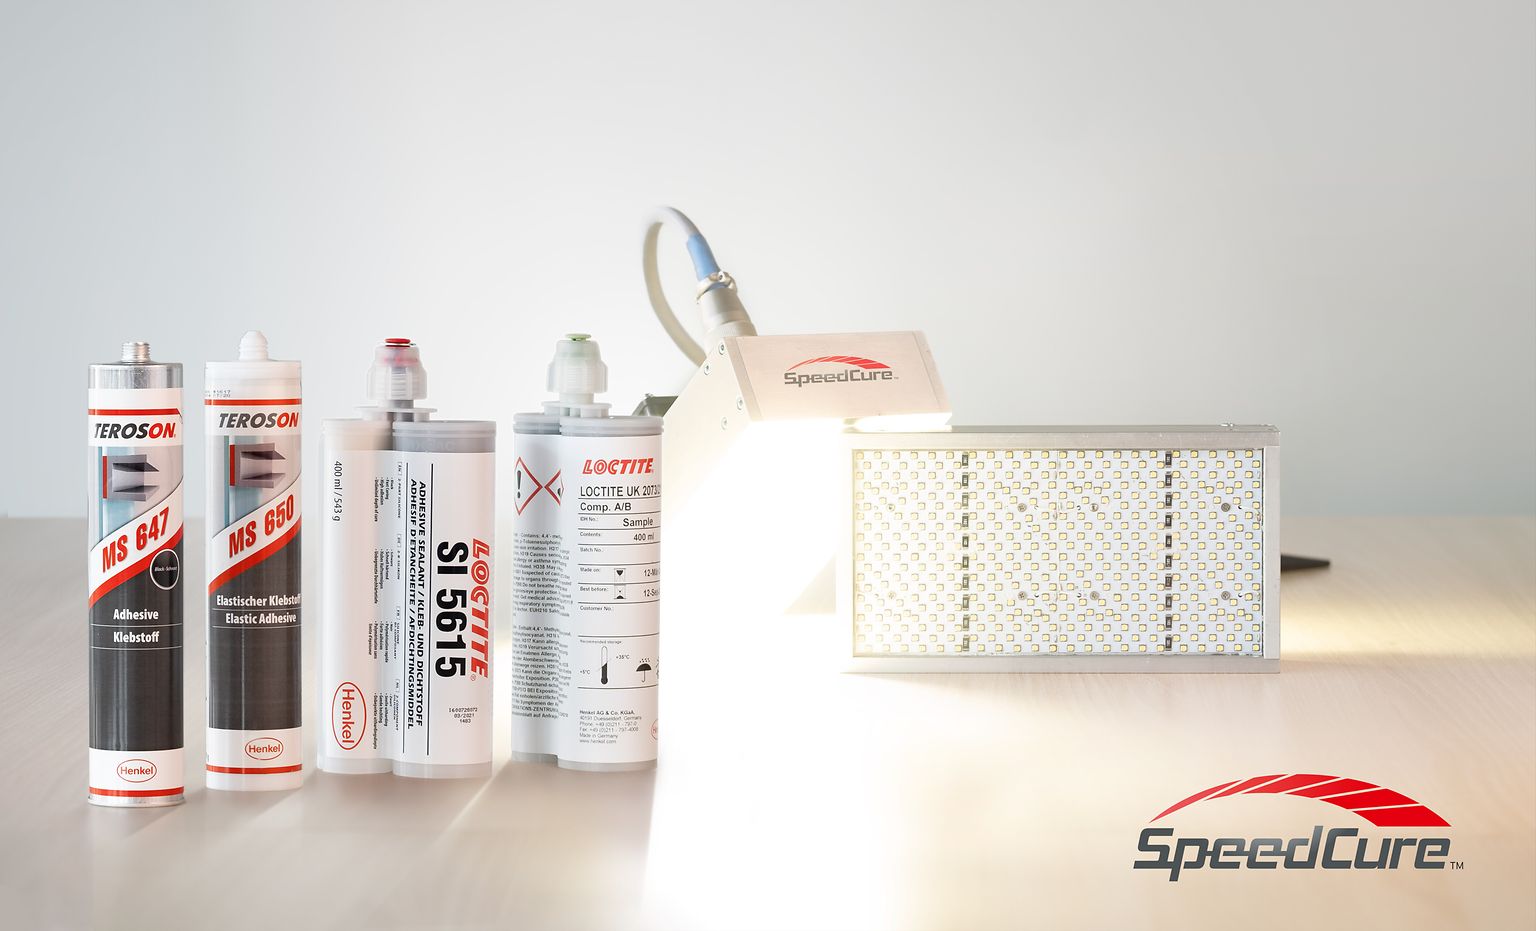 
SpeedCure light and adhesive solutions bring more accurate bonding even on narrow bonding areas or free-form shapes and deliver higher efficiency in the manufacturer’s assembly process.